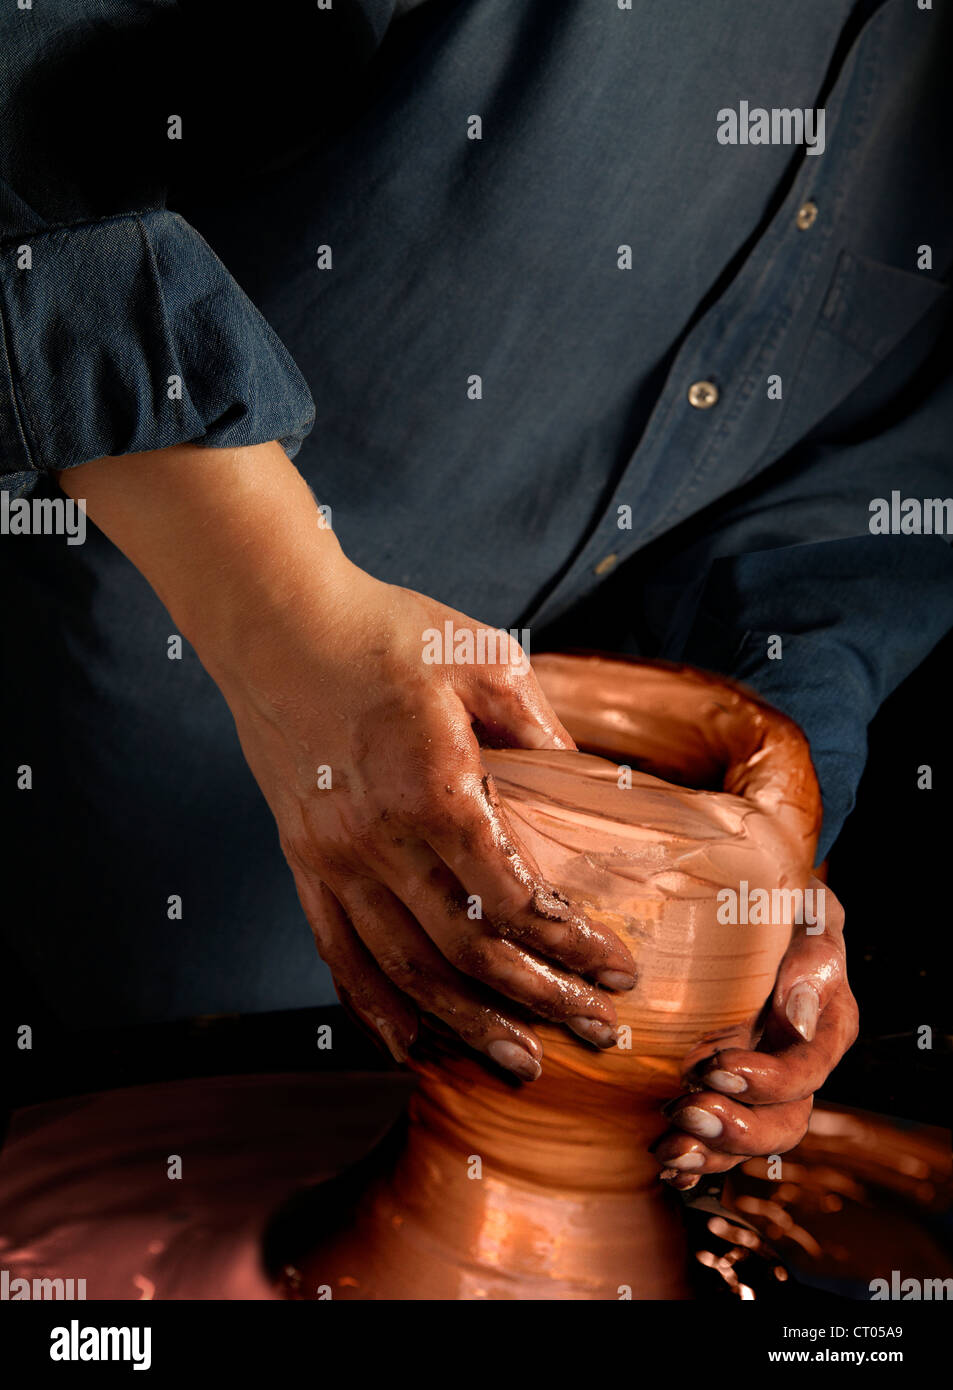 Female hands at Potter's wheel Stock Photo